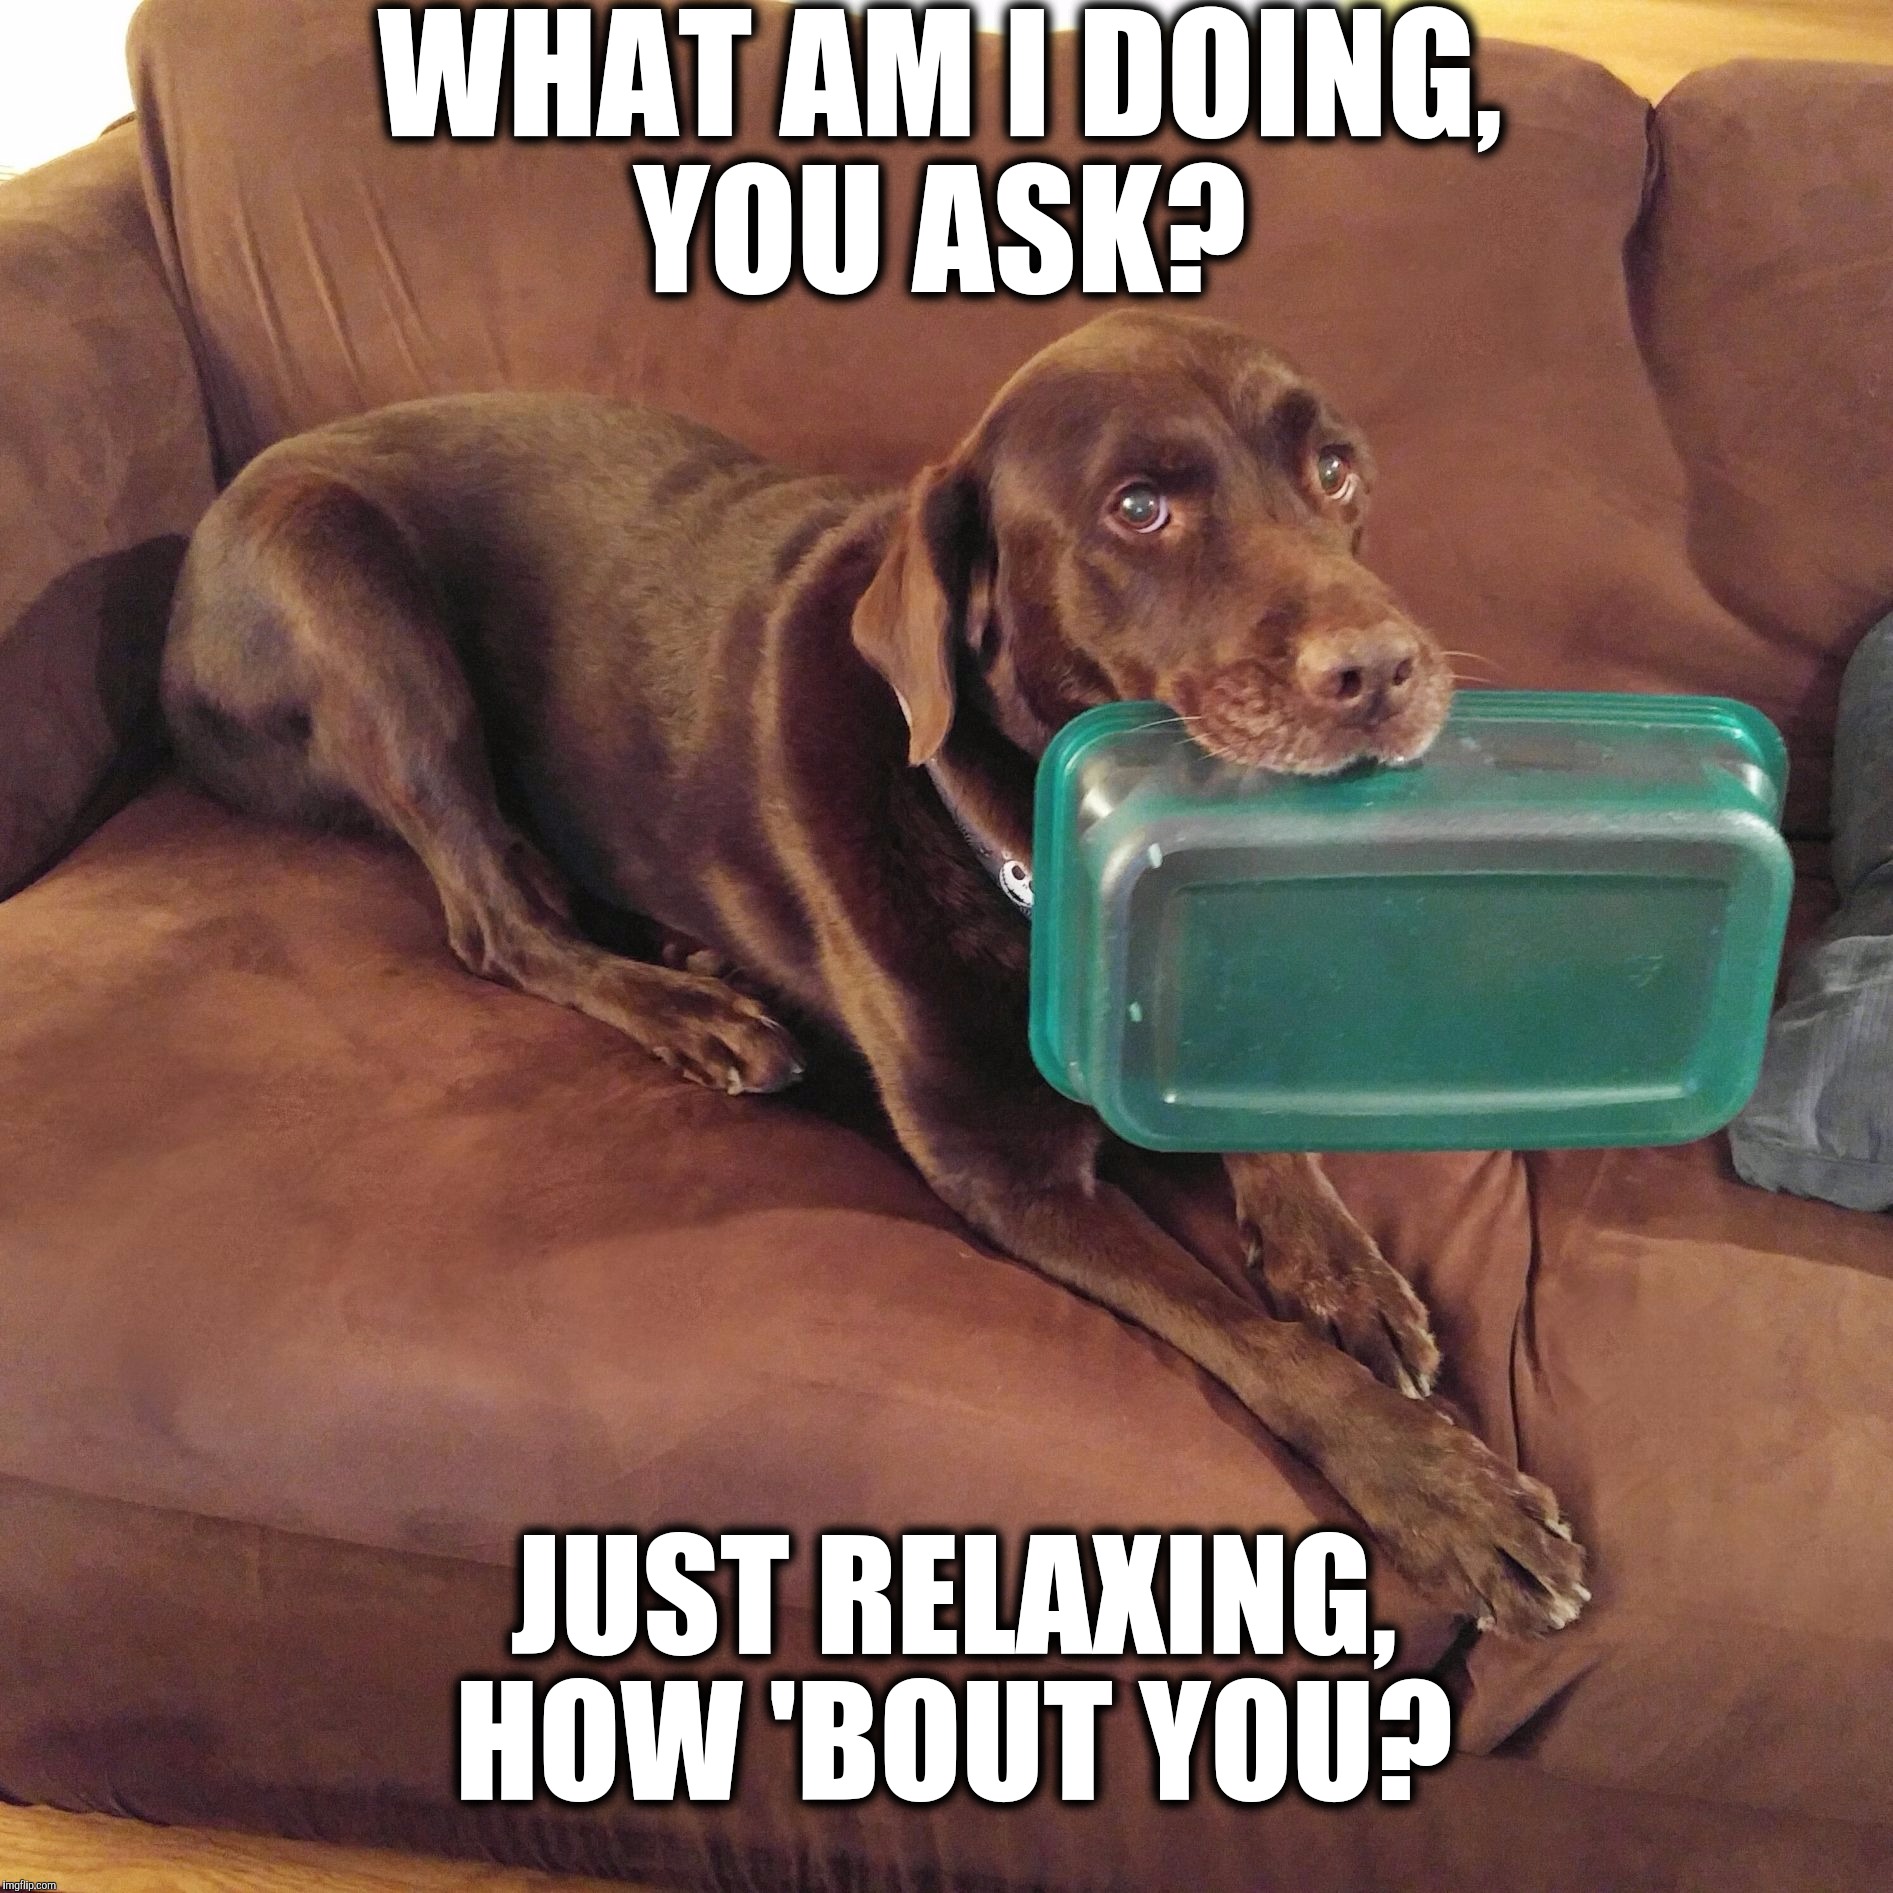 Nothing to see here  | WHAT AM I DOING, YOU ASK? JUST RELAXING, HOW 'BOUT YOU? | image tagged in chuckie the chocolate lab,funny dogs,funny memes,labrador,dog,funny | made w/ Imgflip meme maker